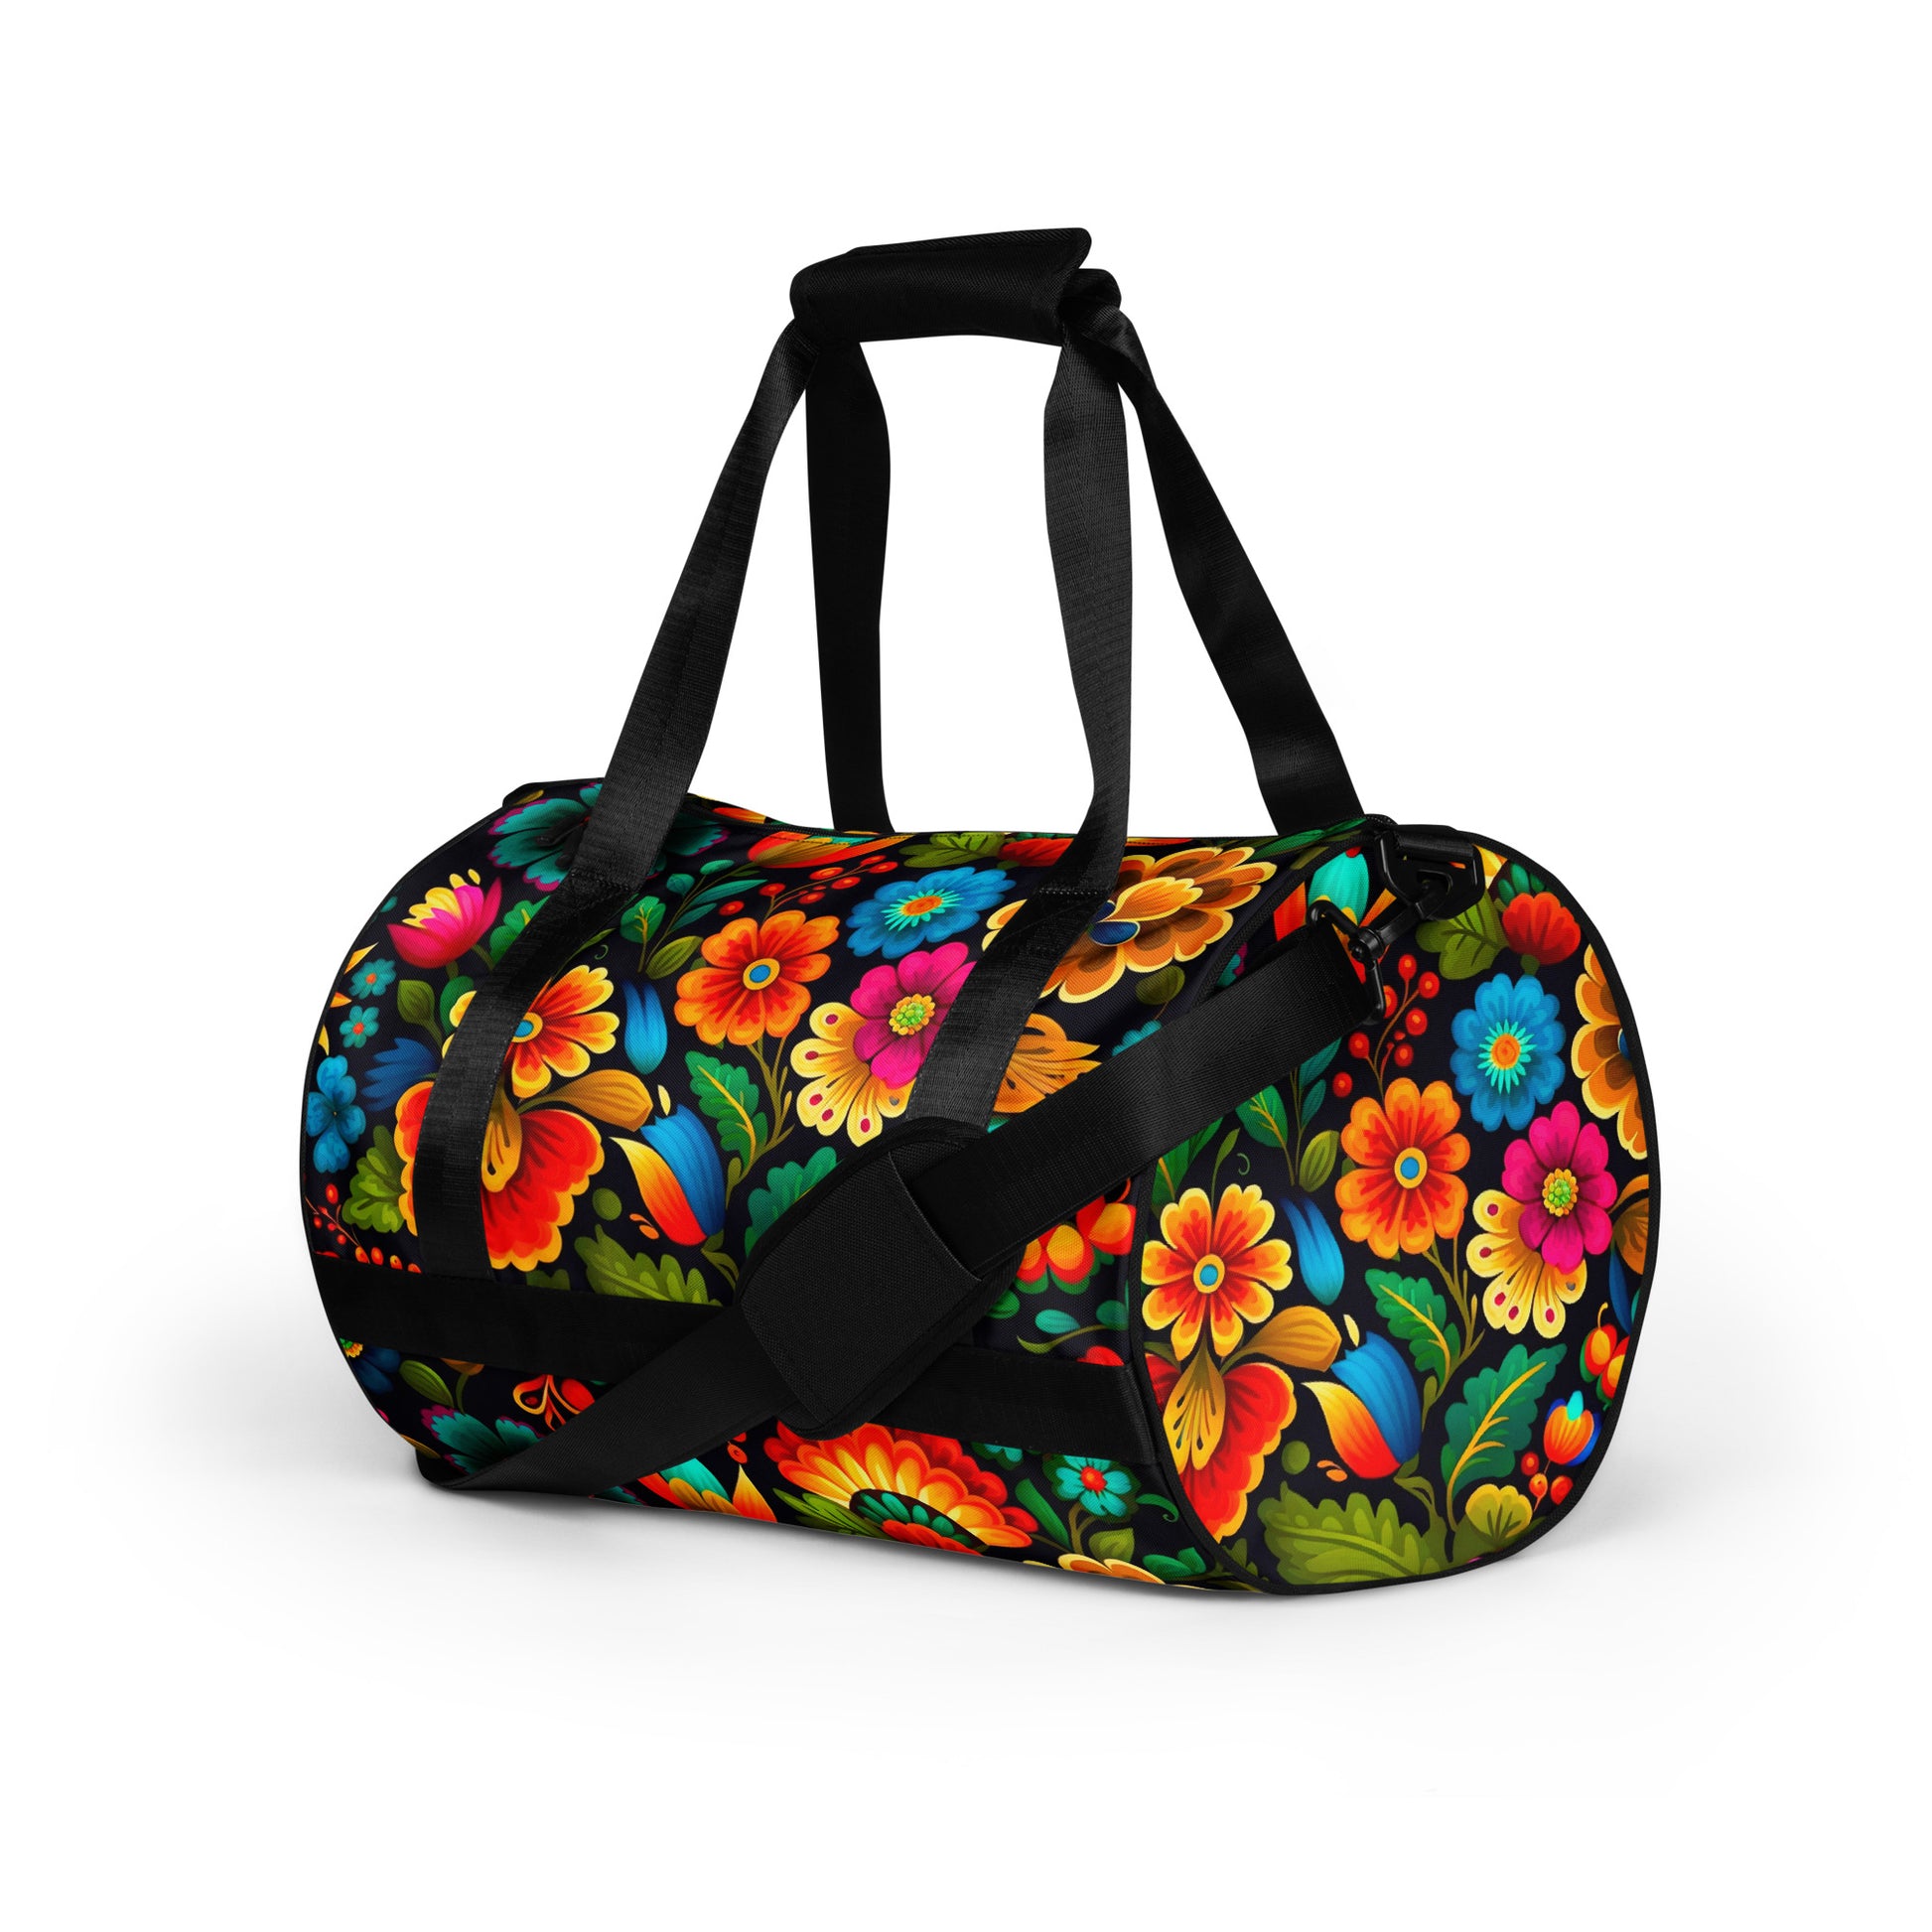 Colorful Spanish Floral All-over print gym bag CedarHill Country Market